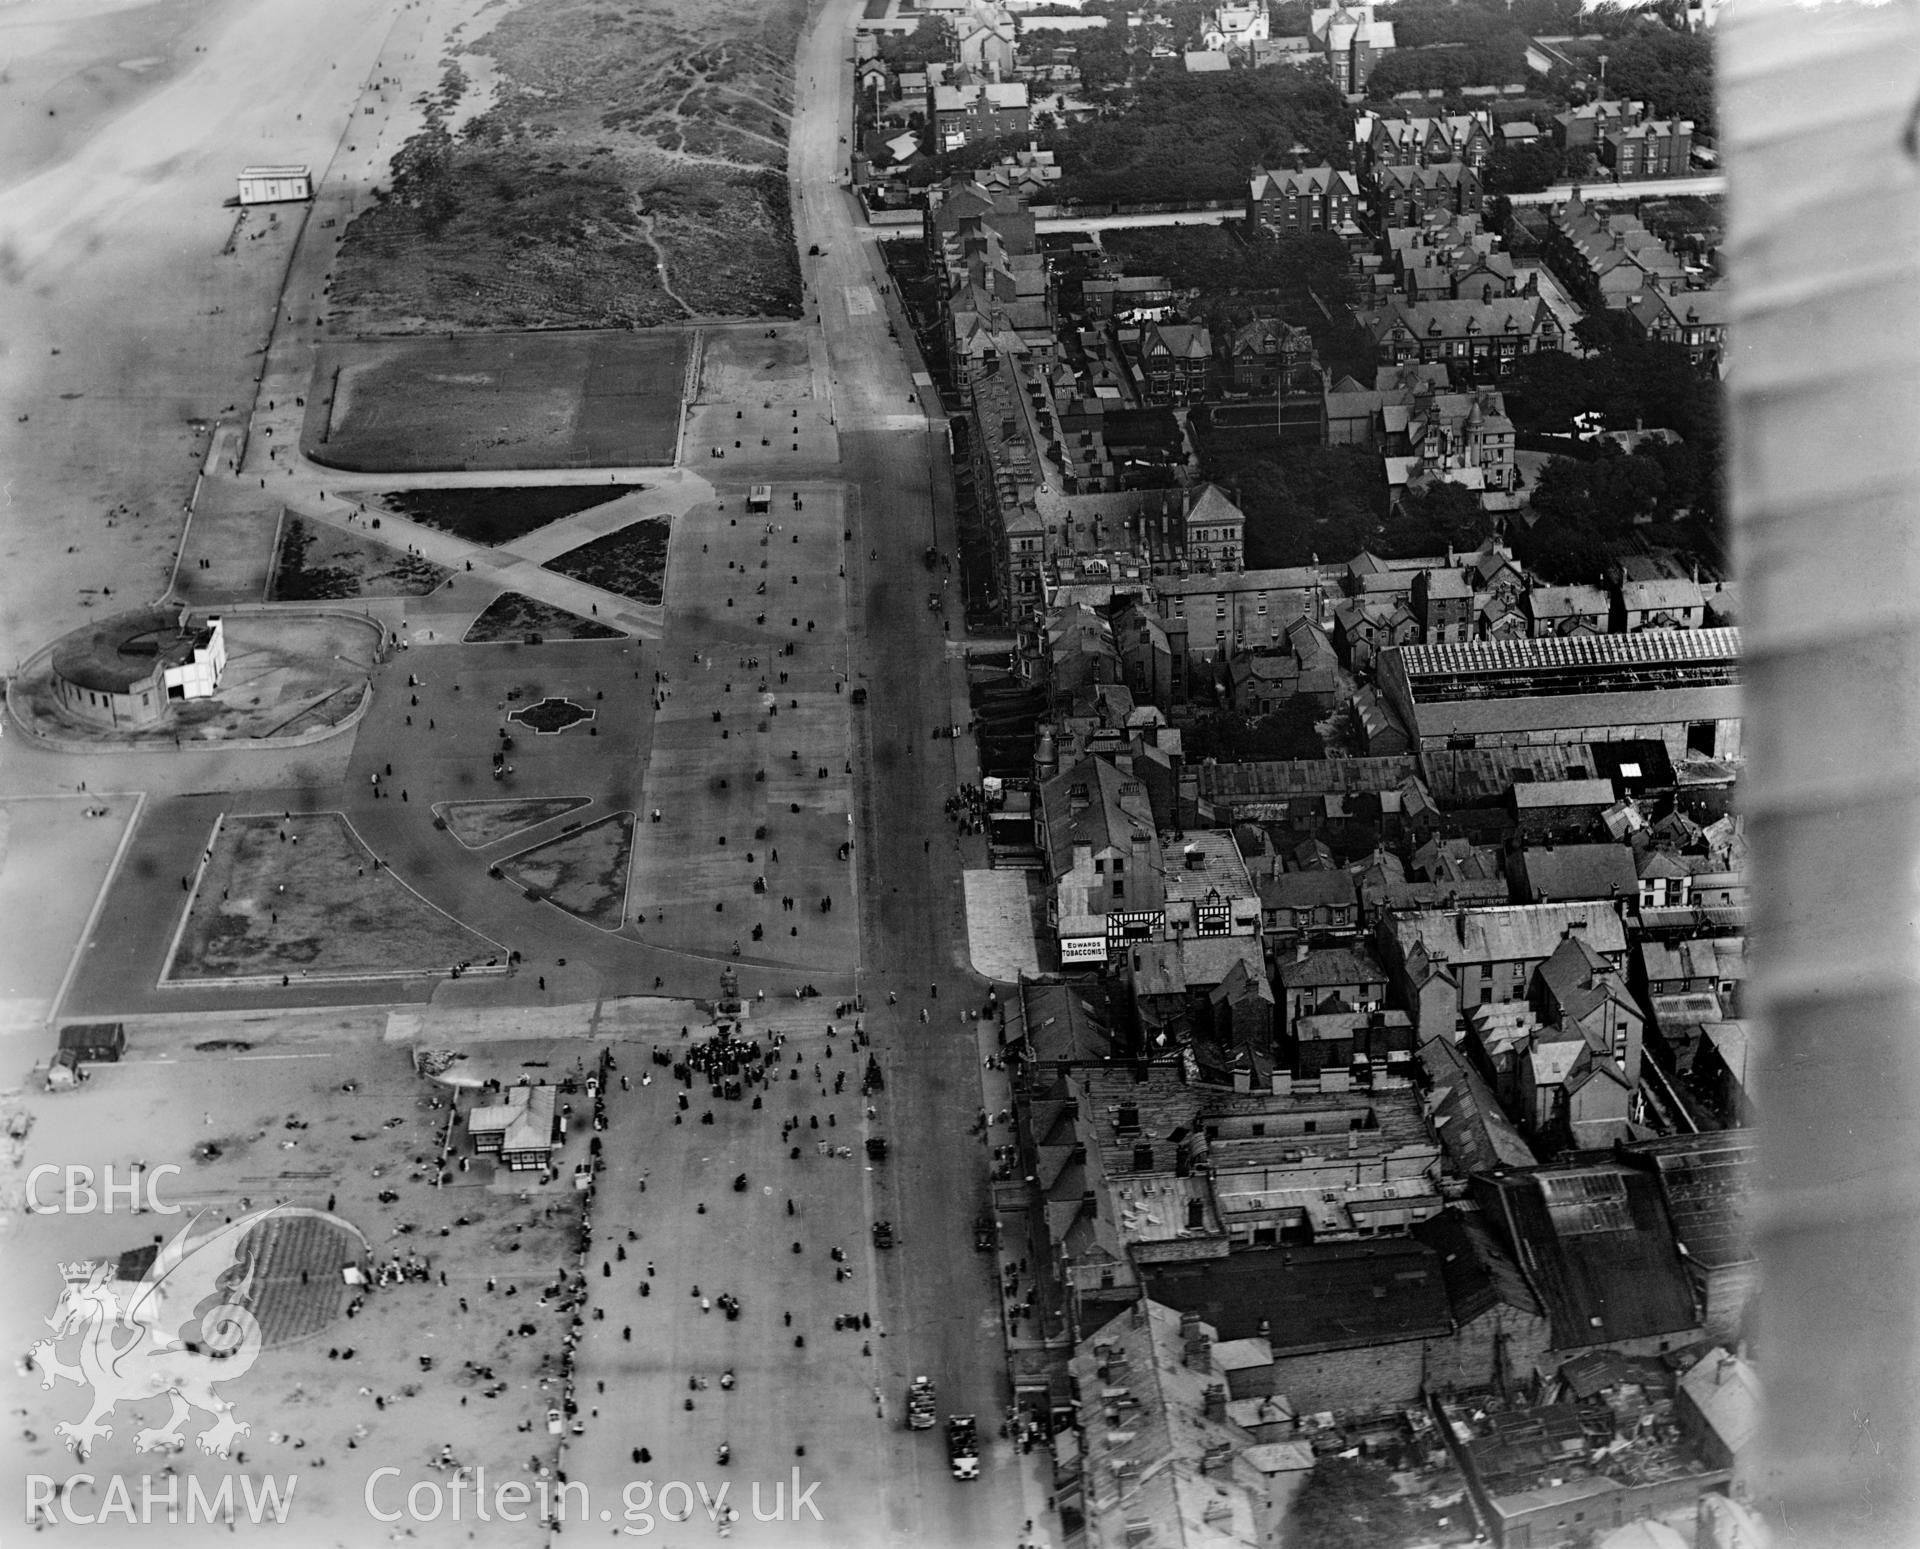 View of Rhyl showing seafront and the Amphitheatre, oblique aerial view. 5?x4? black and white glass plate negative.